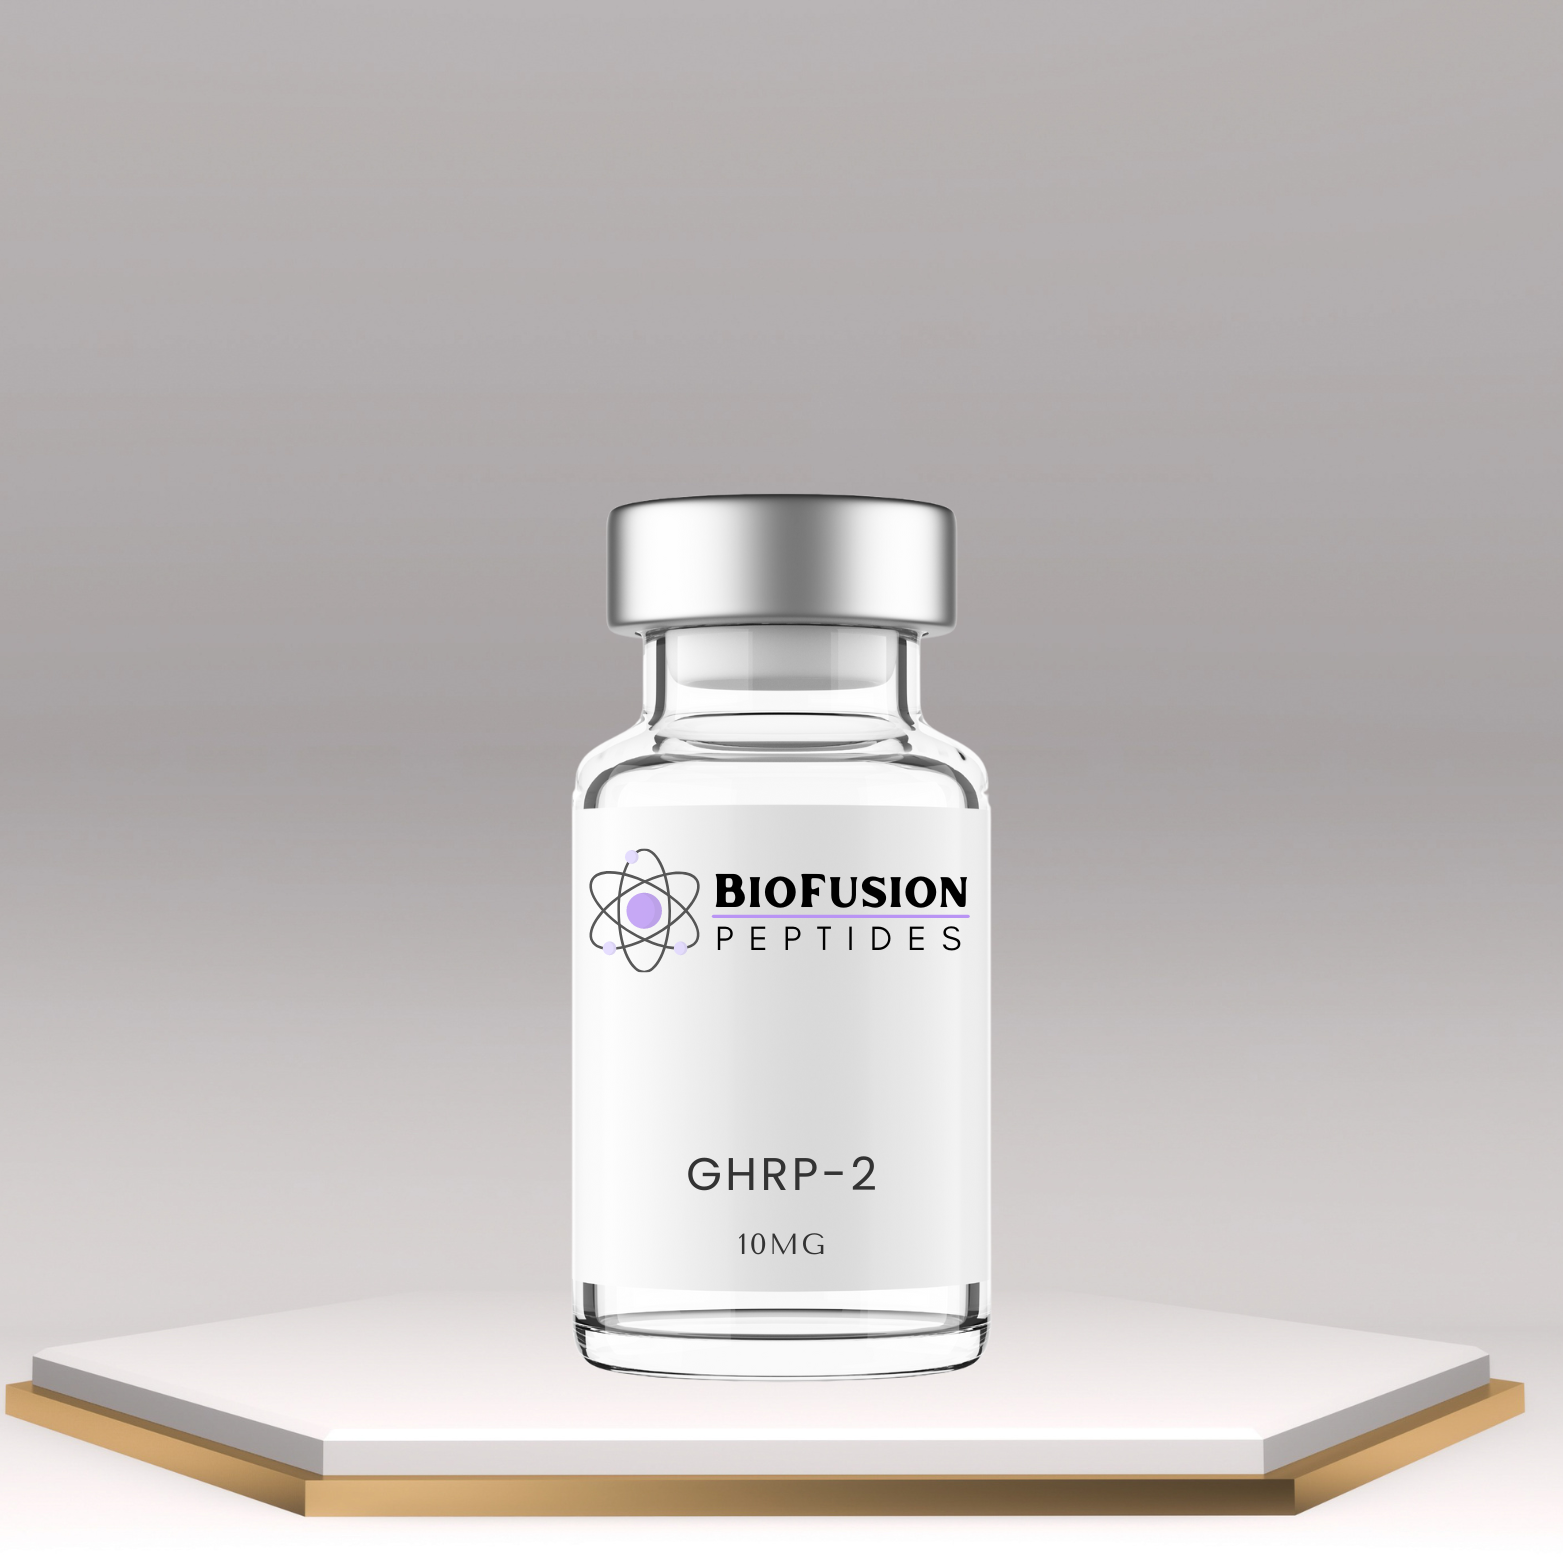 BioFusion Peptides GHRP-2 10MG vial